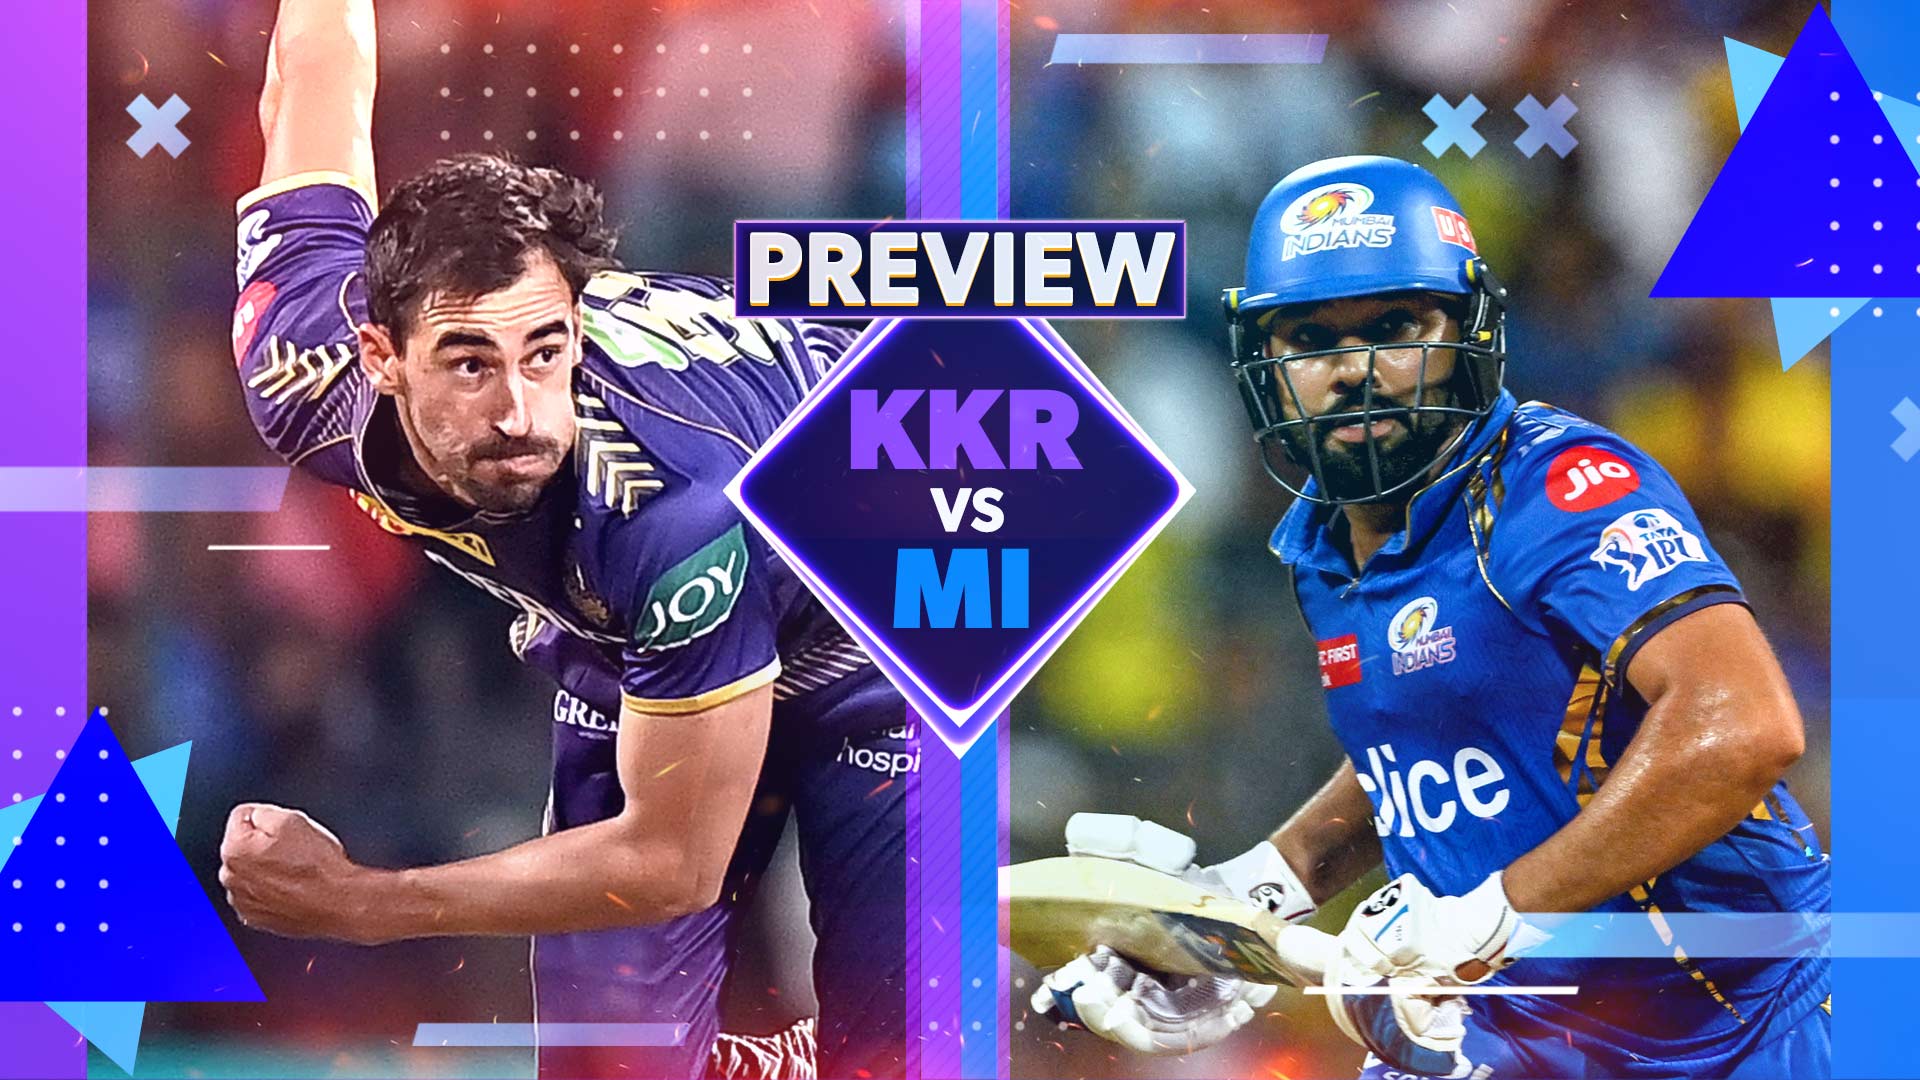 KKR vs MI: All You Need to Know